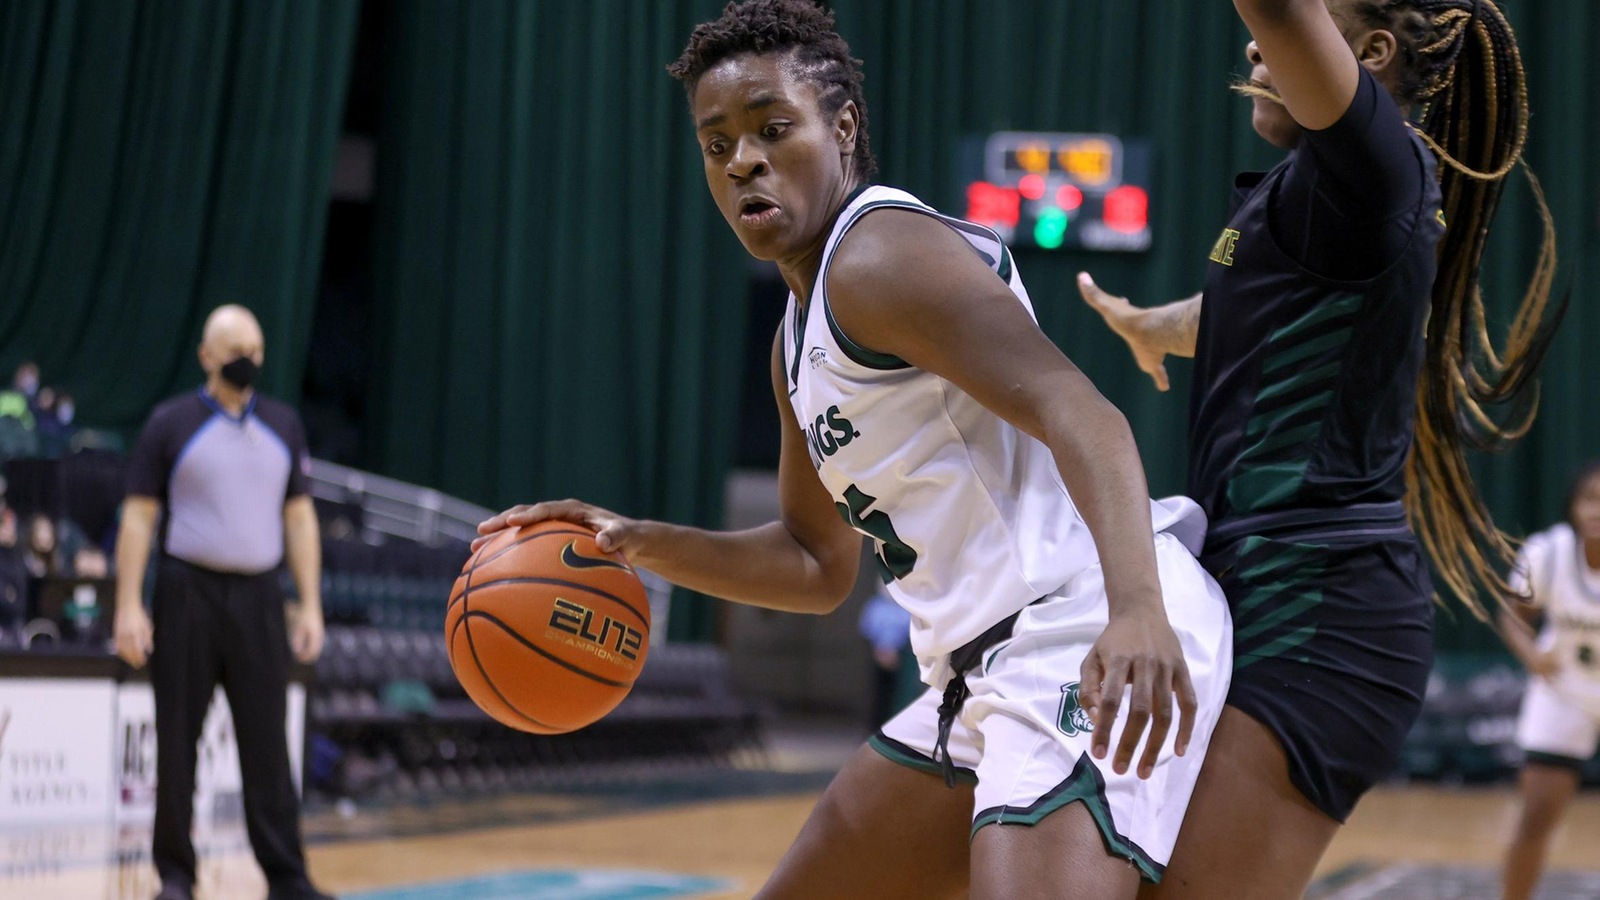 Ngwafang Double-Doubles Leads Women’s Basketball To 86-60 Victory Over Wright State